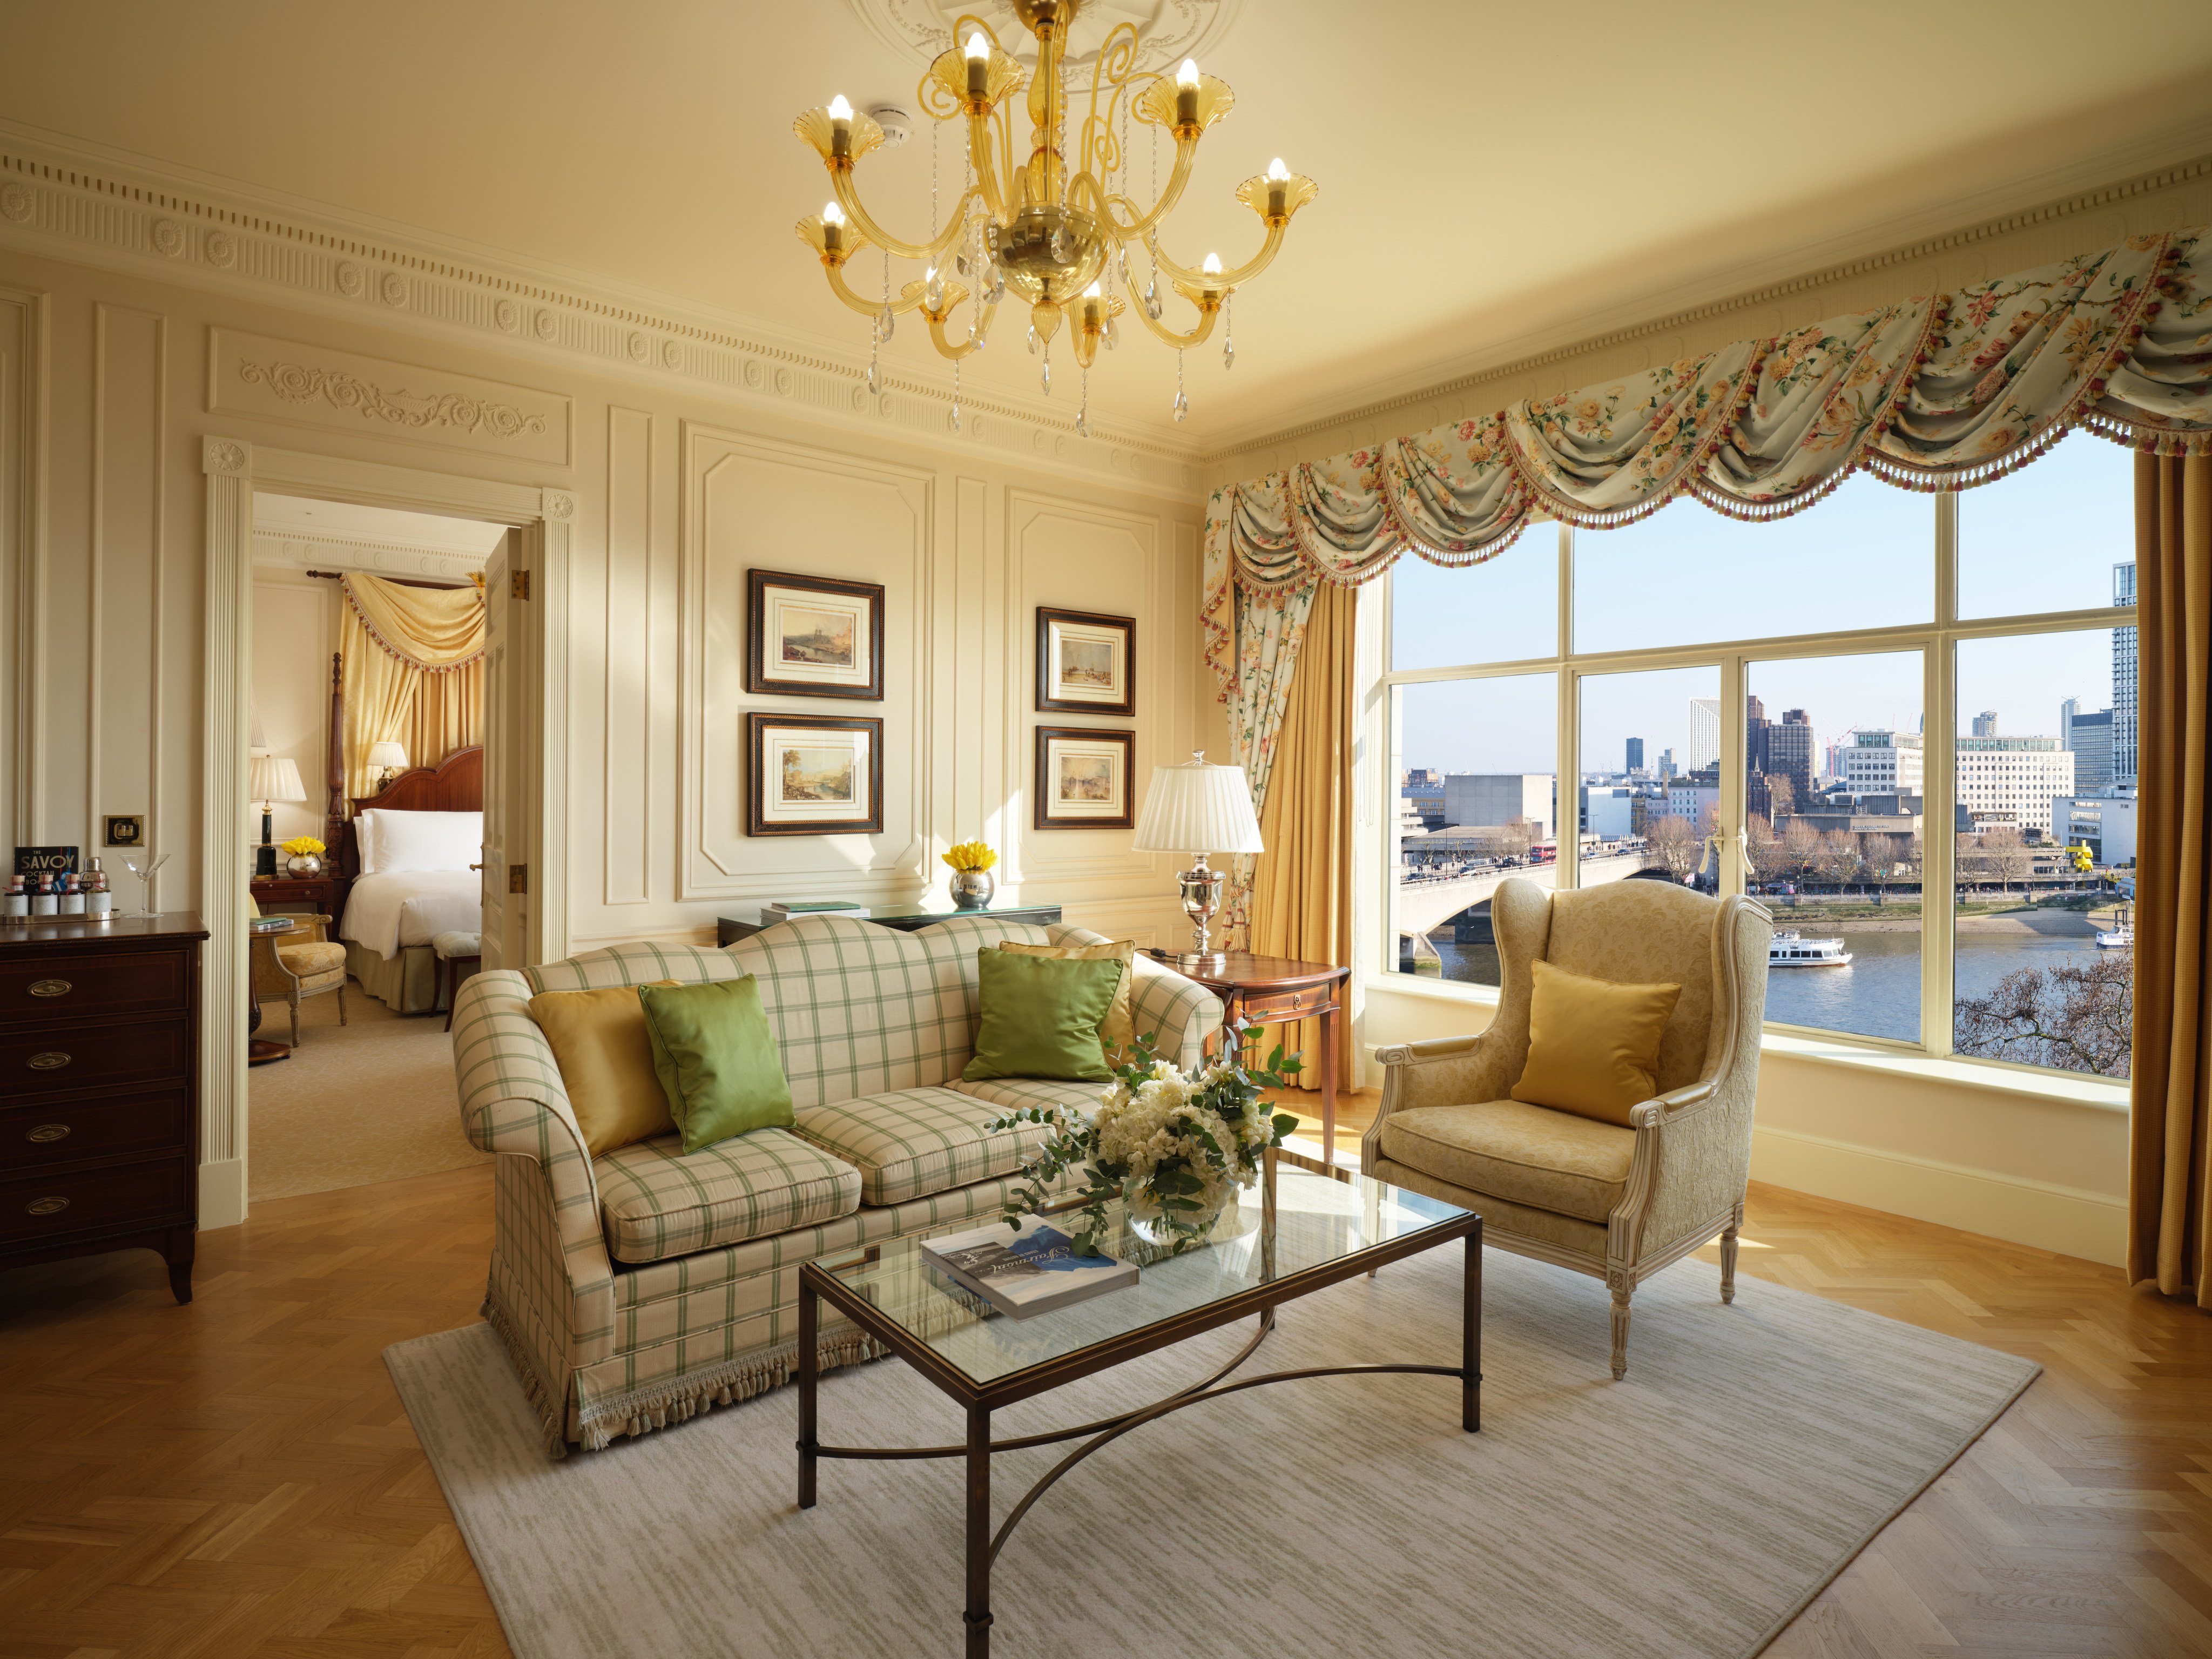 A one-bedroom river-view suite at The Savoy hotel in London. Photo: Jack Hardy